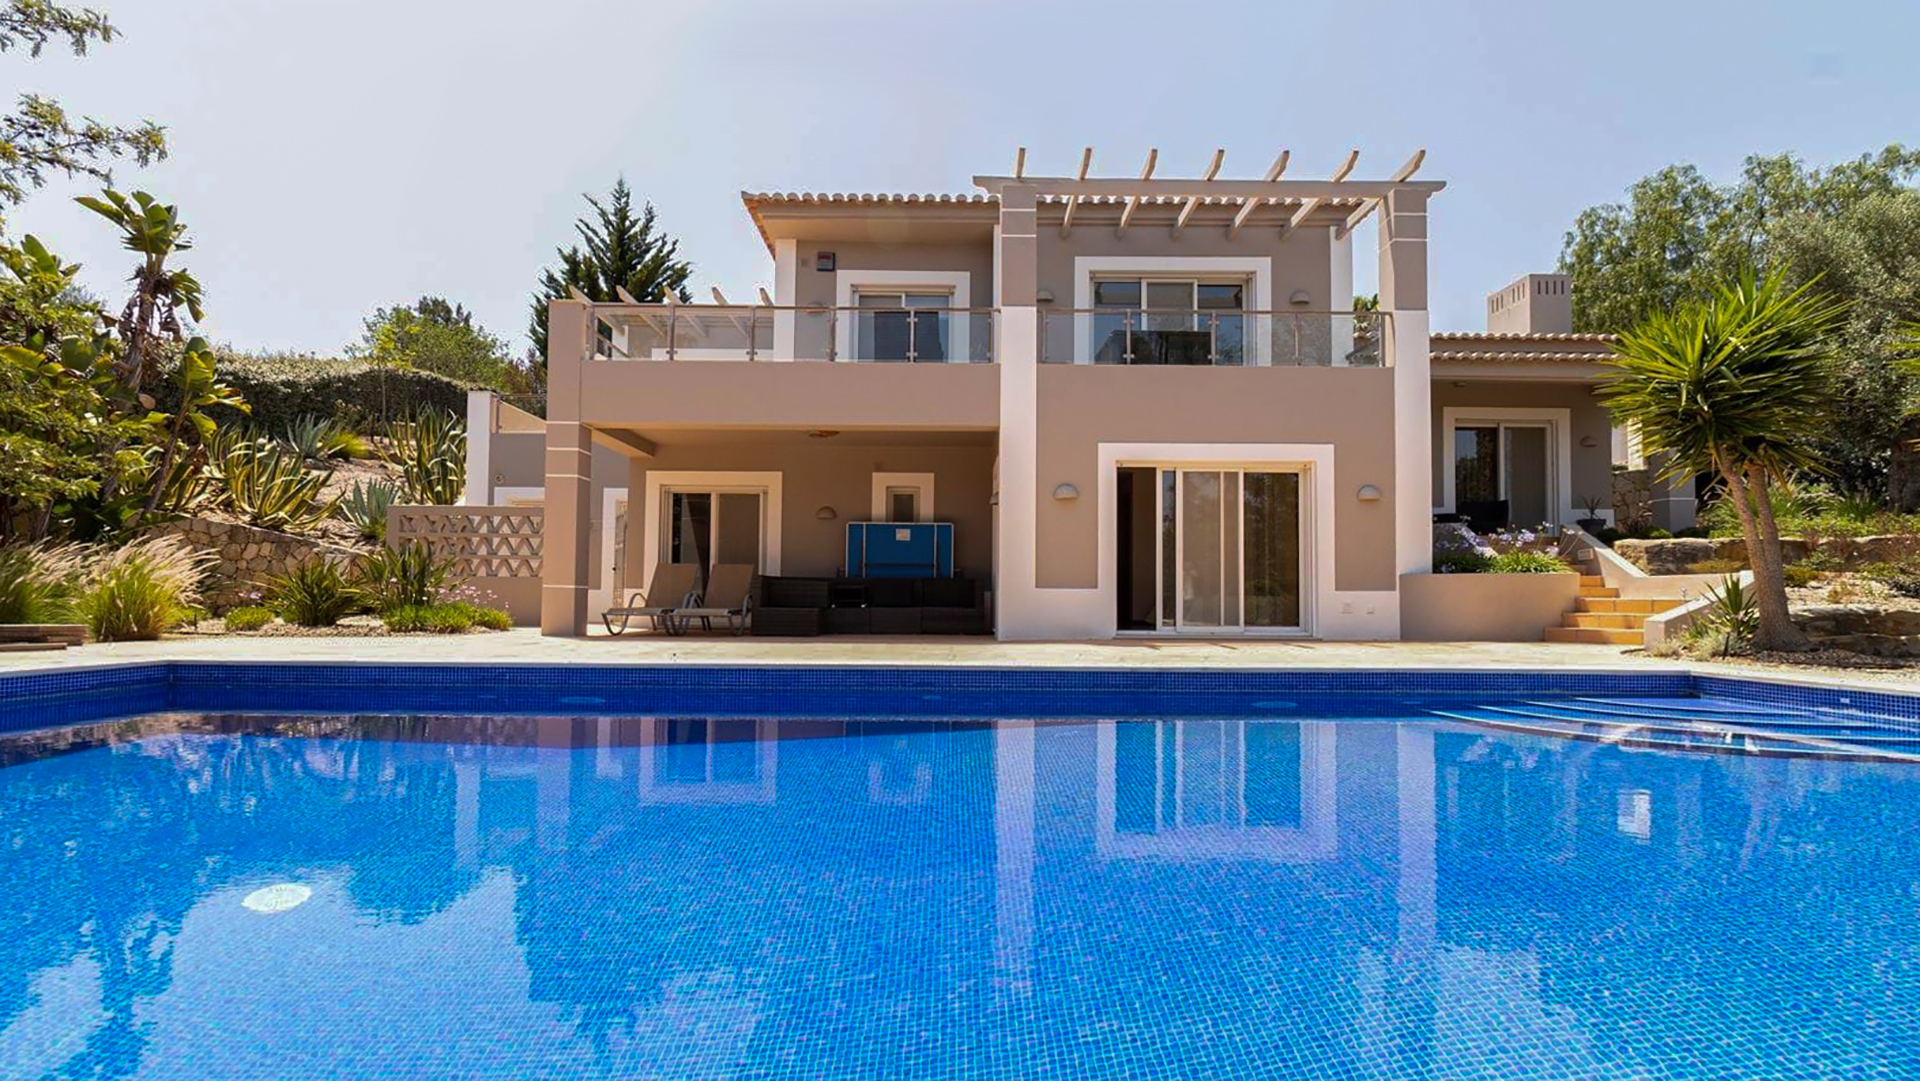 Spacious 3 bedroom villa with pool in golf resort near Carvoeiro, West Algarve | PCG2148 3 bedroom villa with en-suite bathrooms and pool, surrounded by a large well-kept garden in popular golf resort. Perfect as a permanent residence and for renting out.